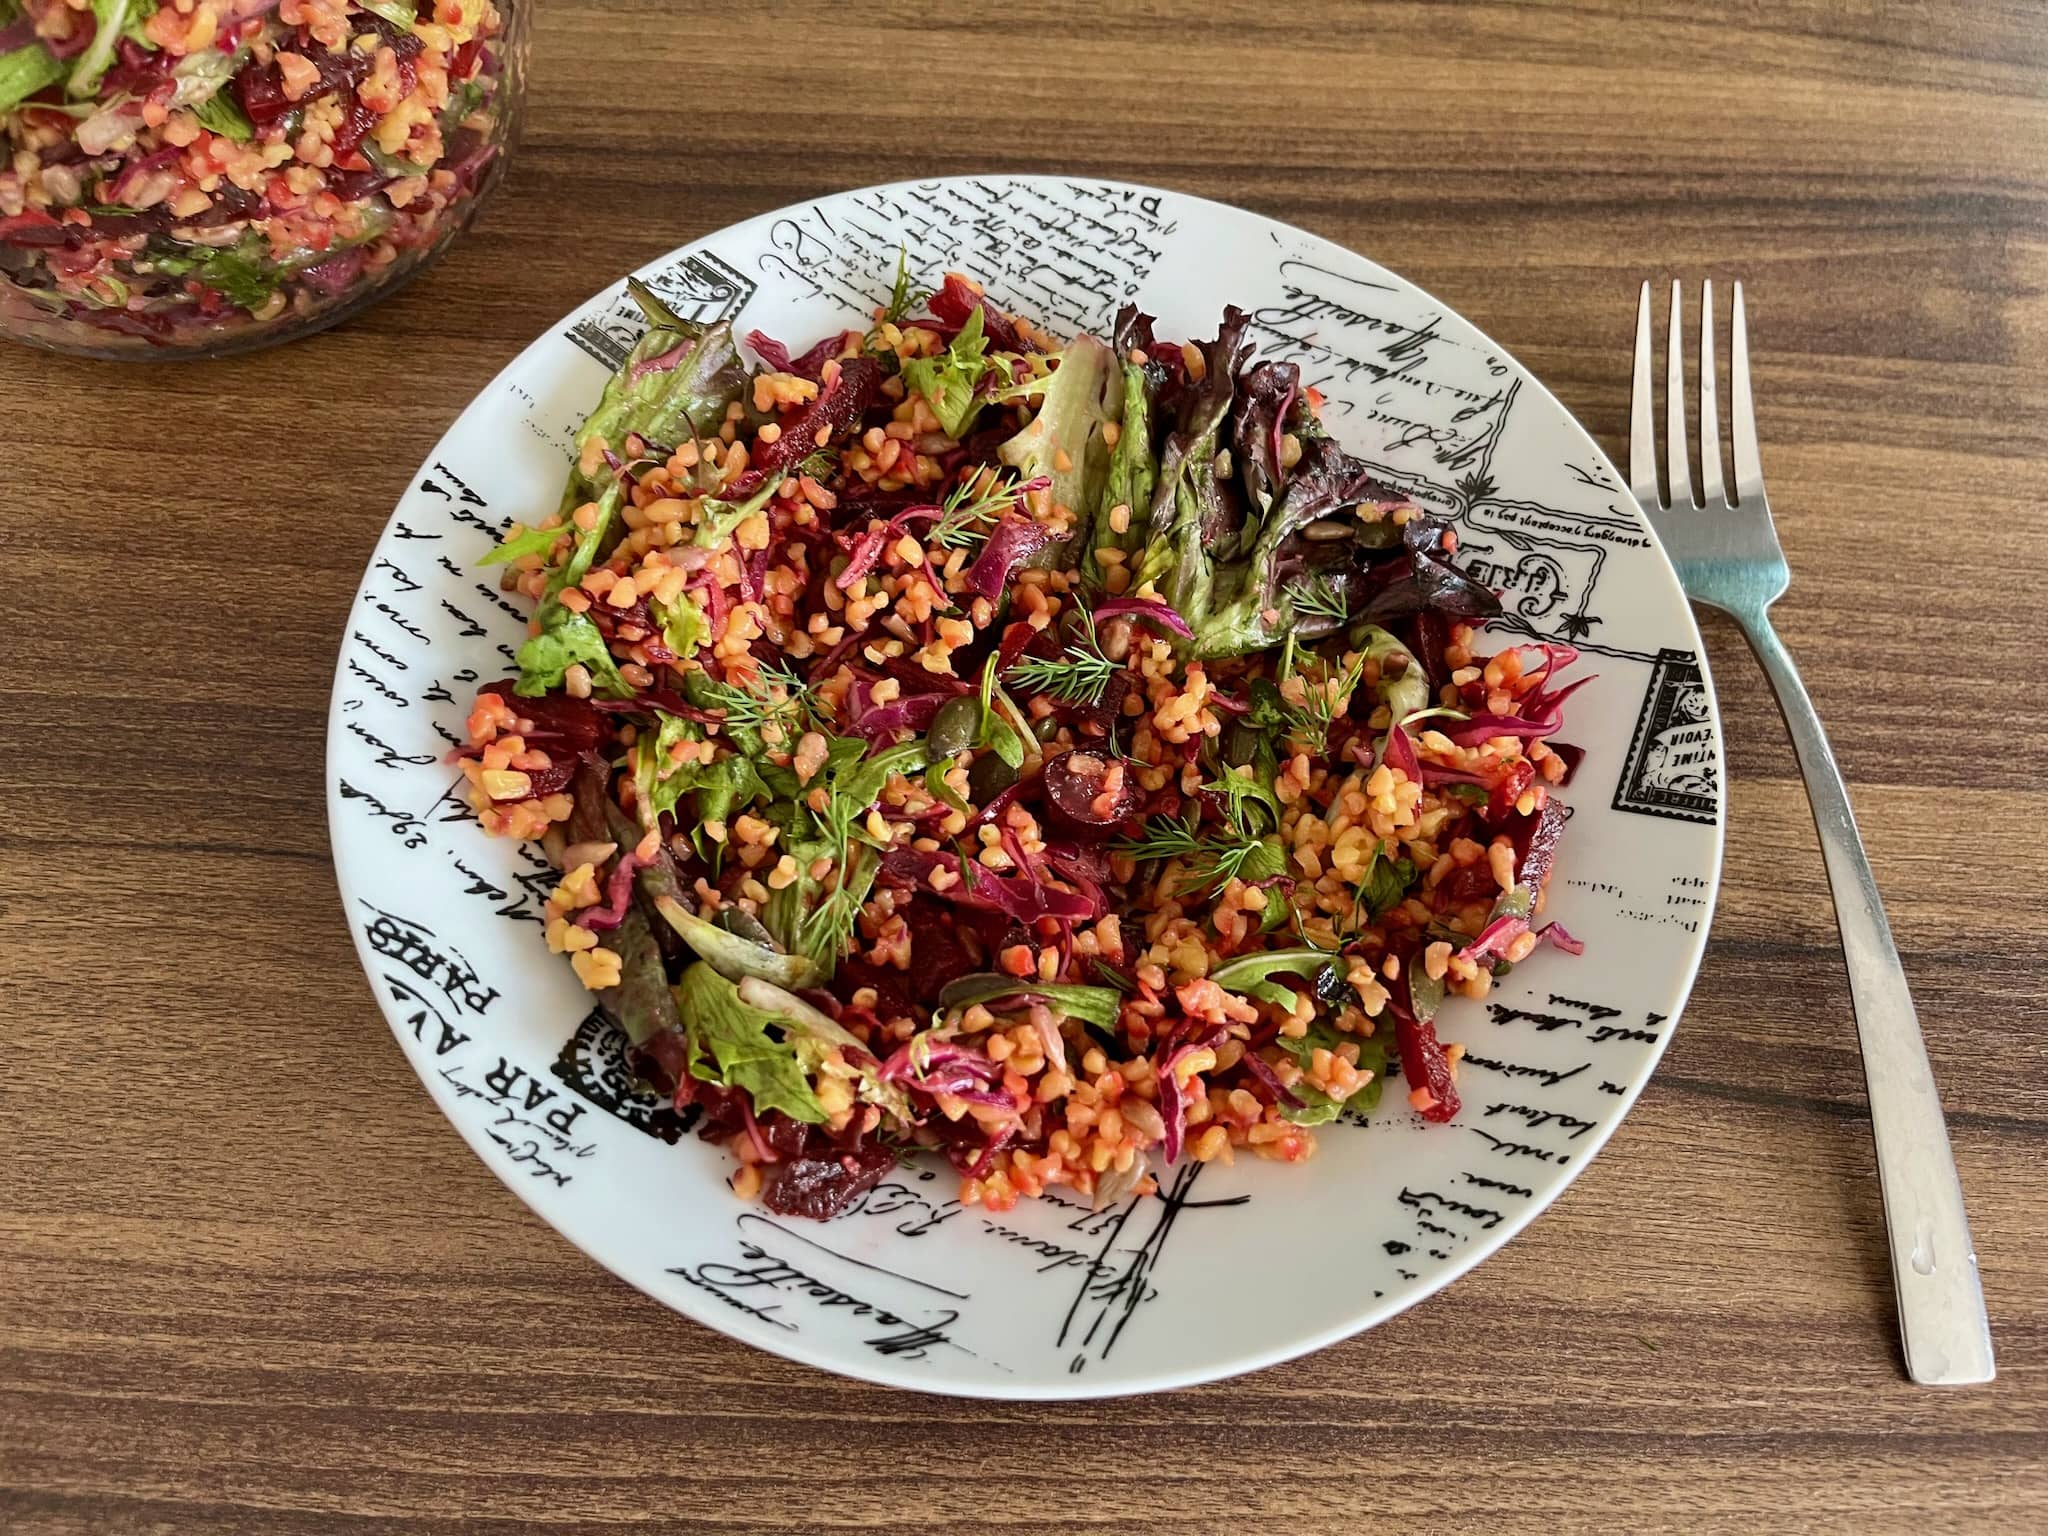 A portion of grainy beetroot and bulgur salad on a plate